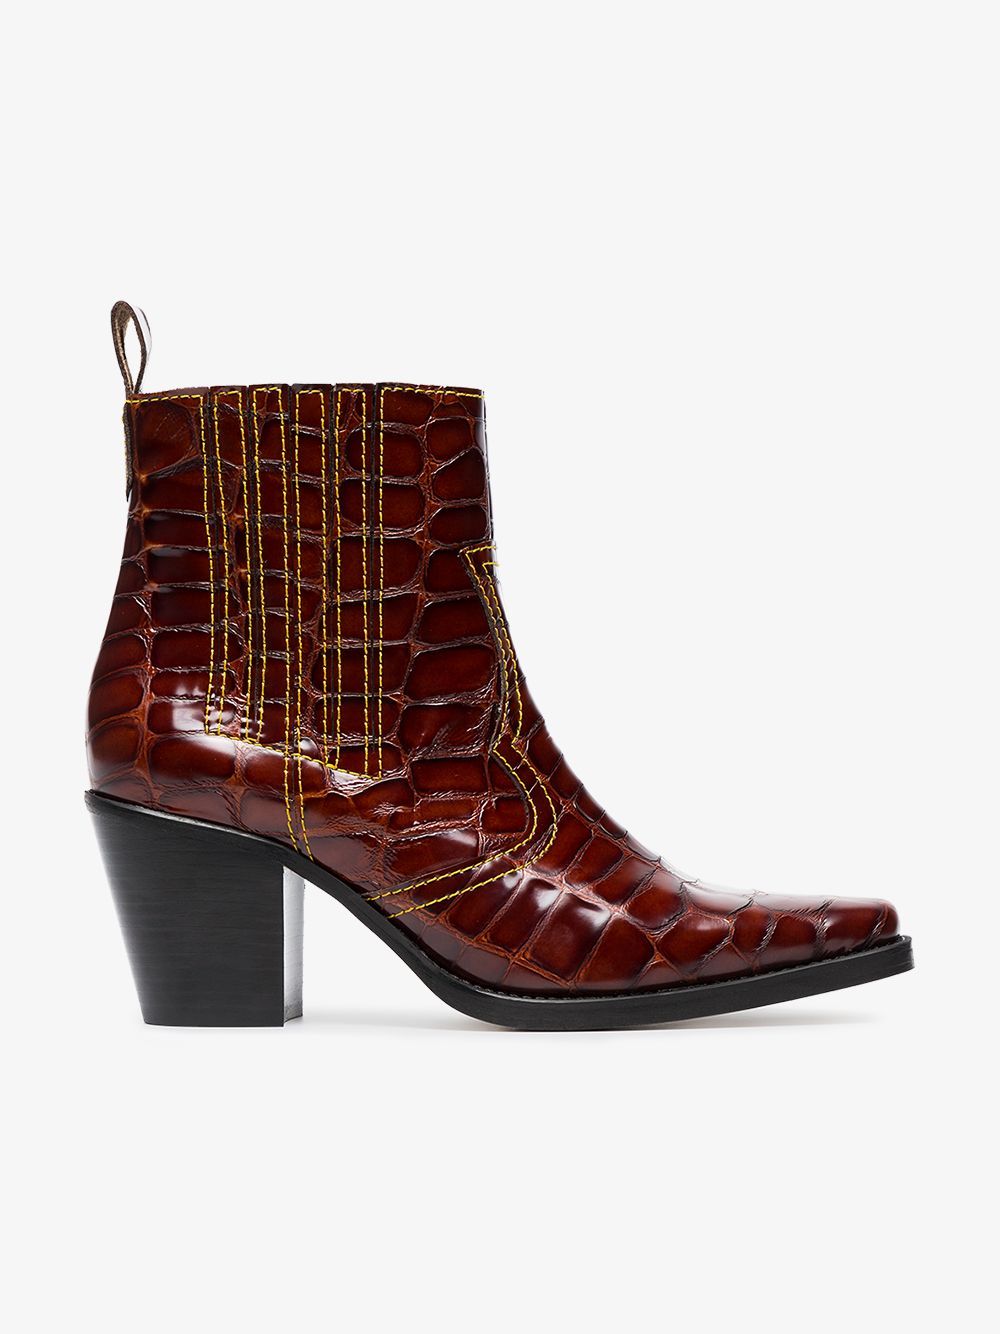 Ganni Brown Rosette 75 patent leather cowboy boots | Browns Fashion